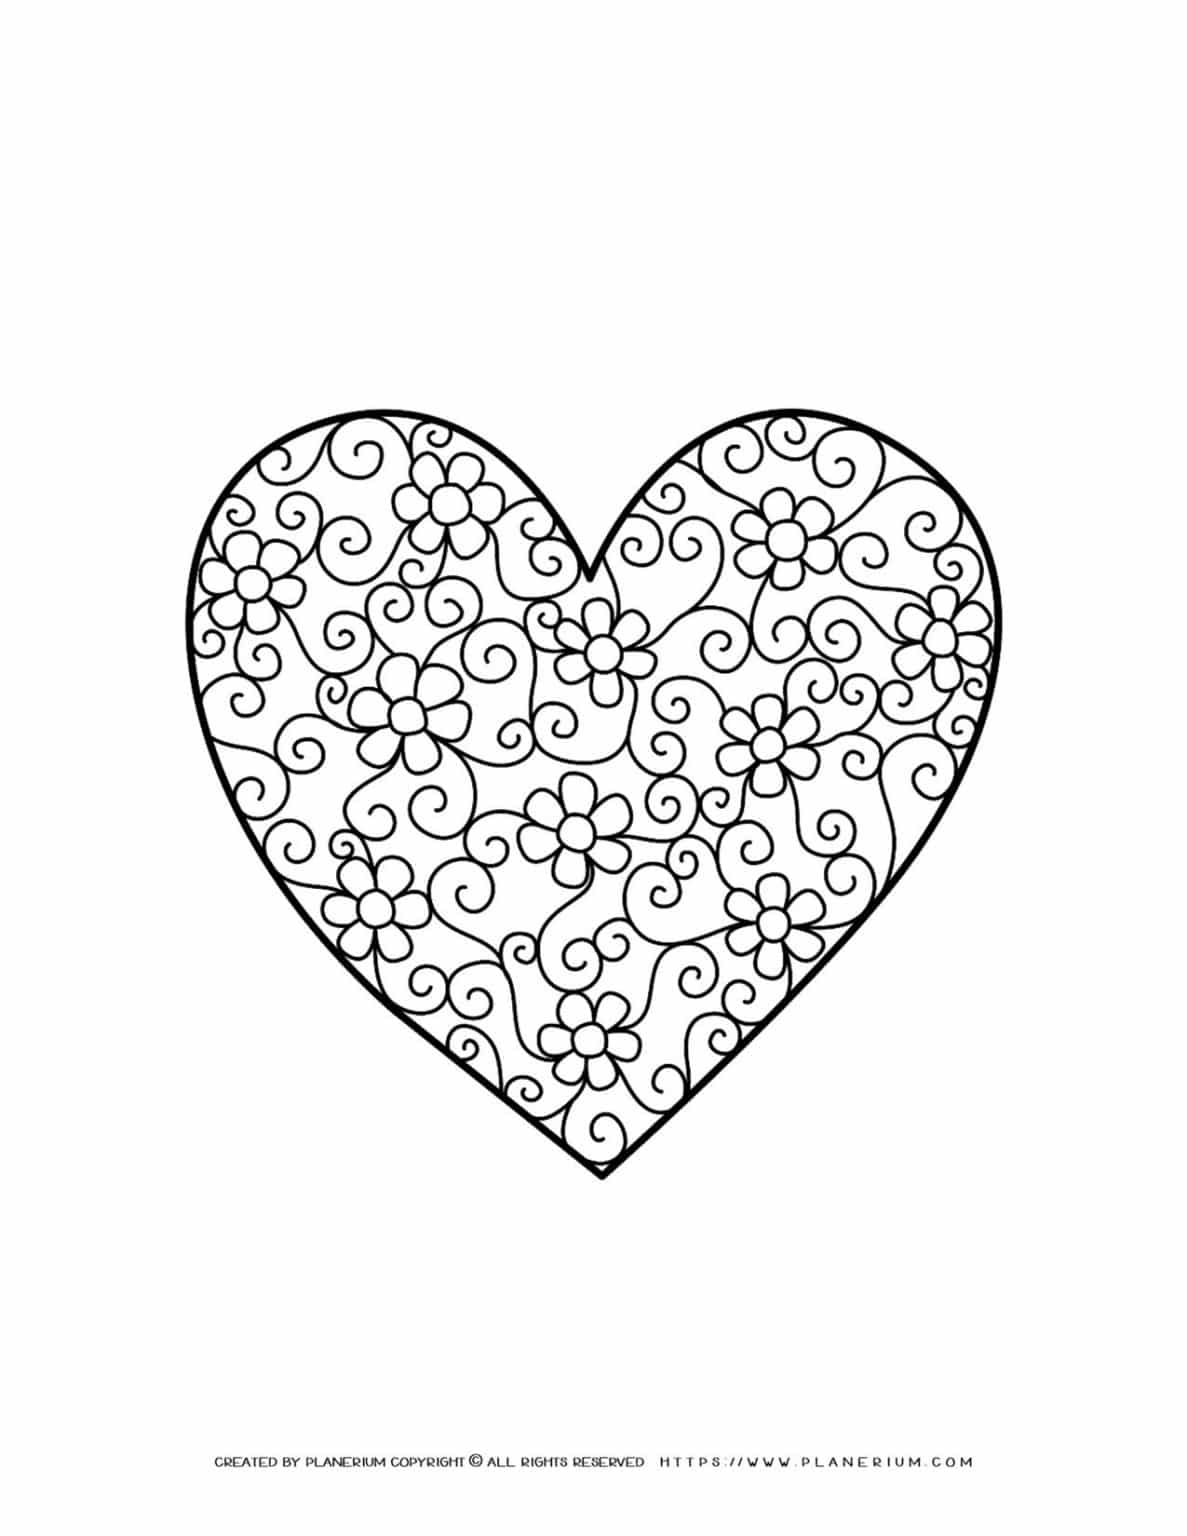 Valentines Day - Coloring Page - Heart Flowers | Planerium